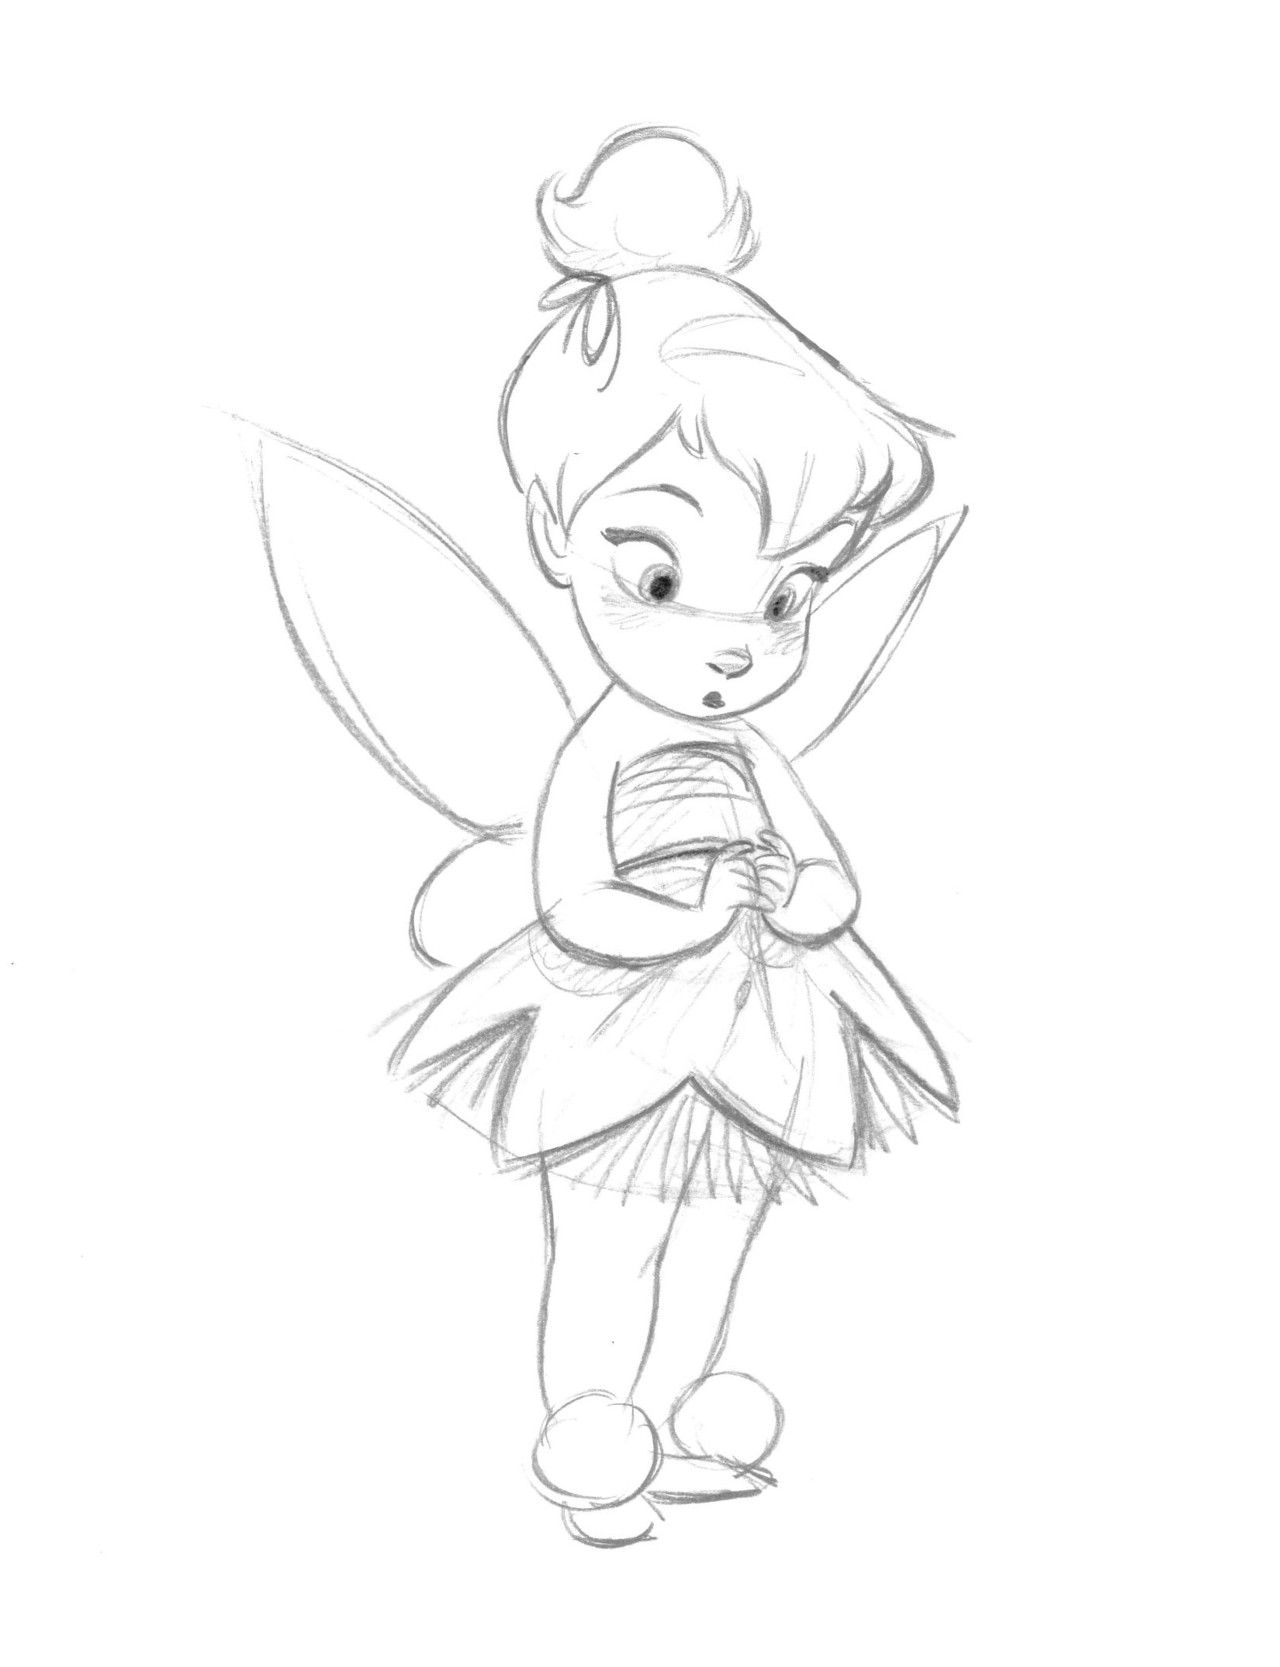 Share more than 76 pencil sketches of tinkerbell best - seven.edu.vn